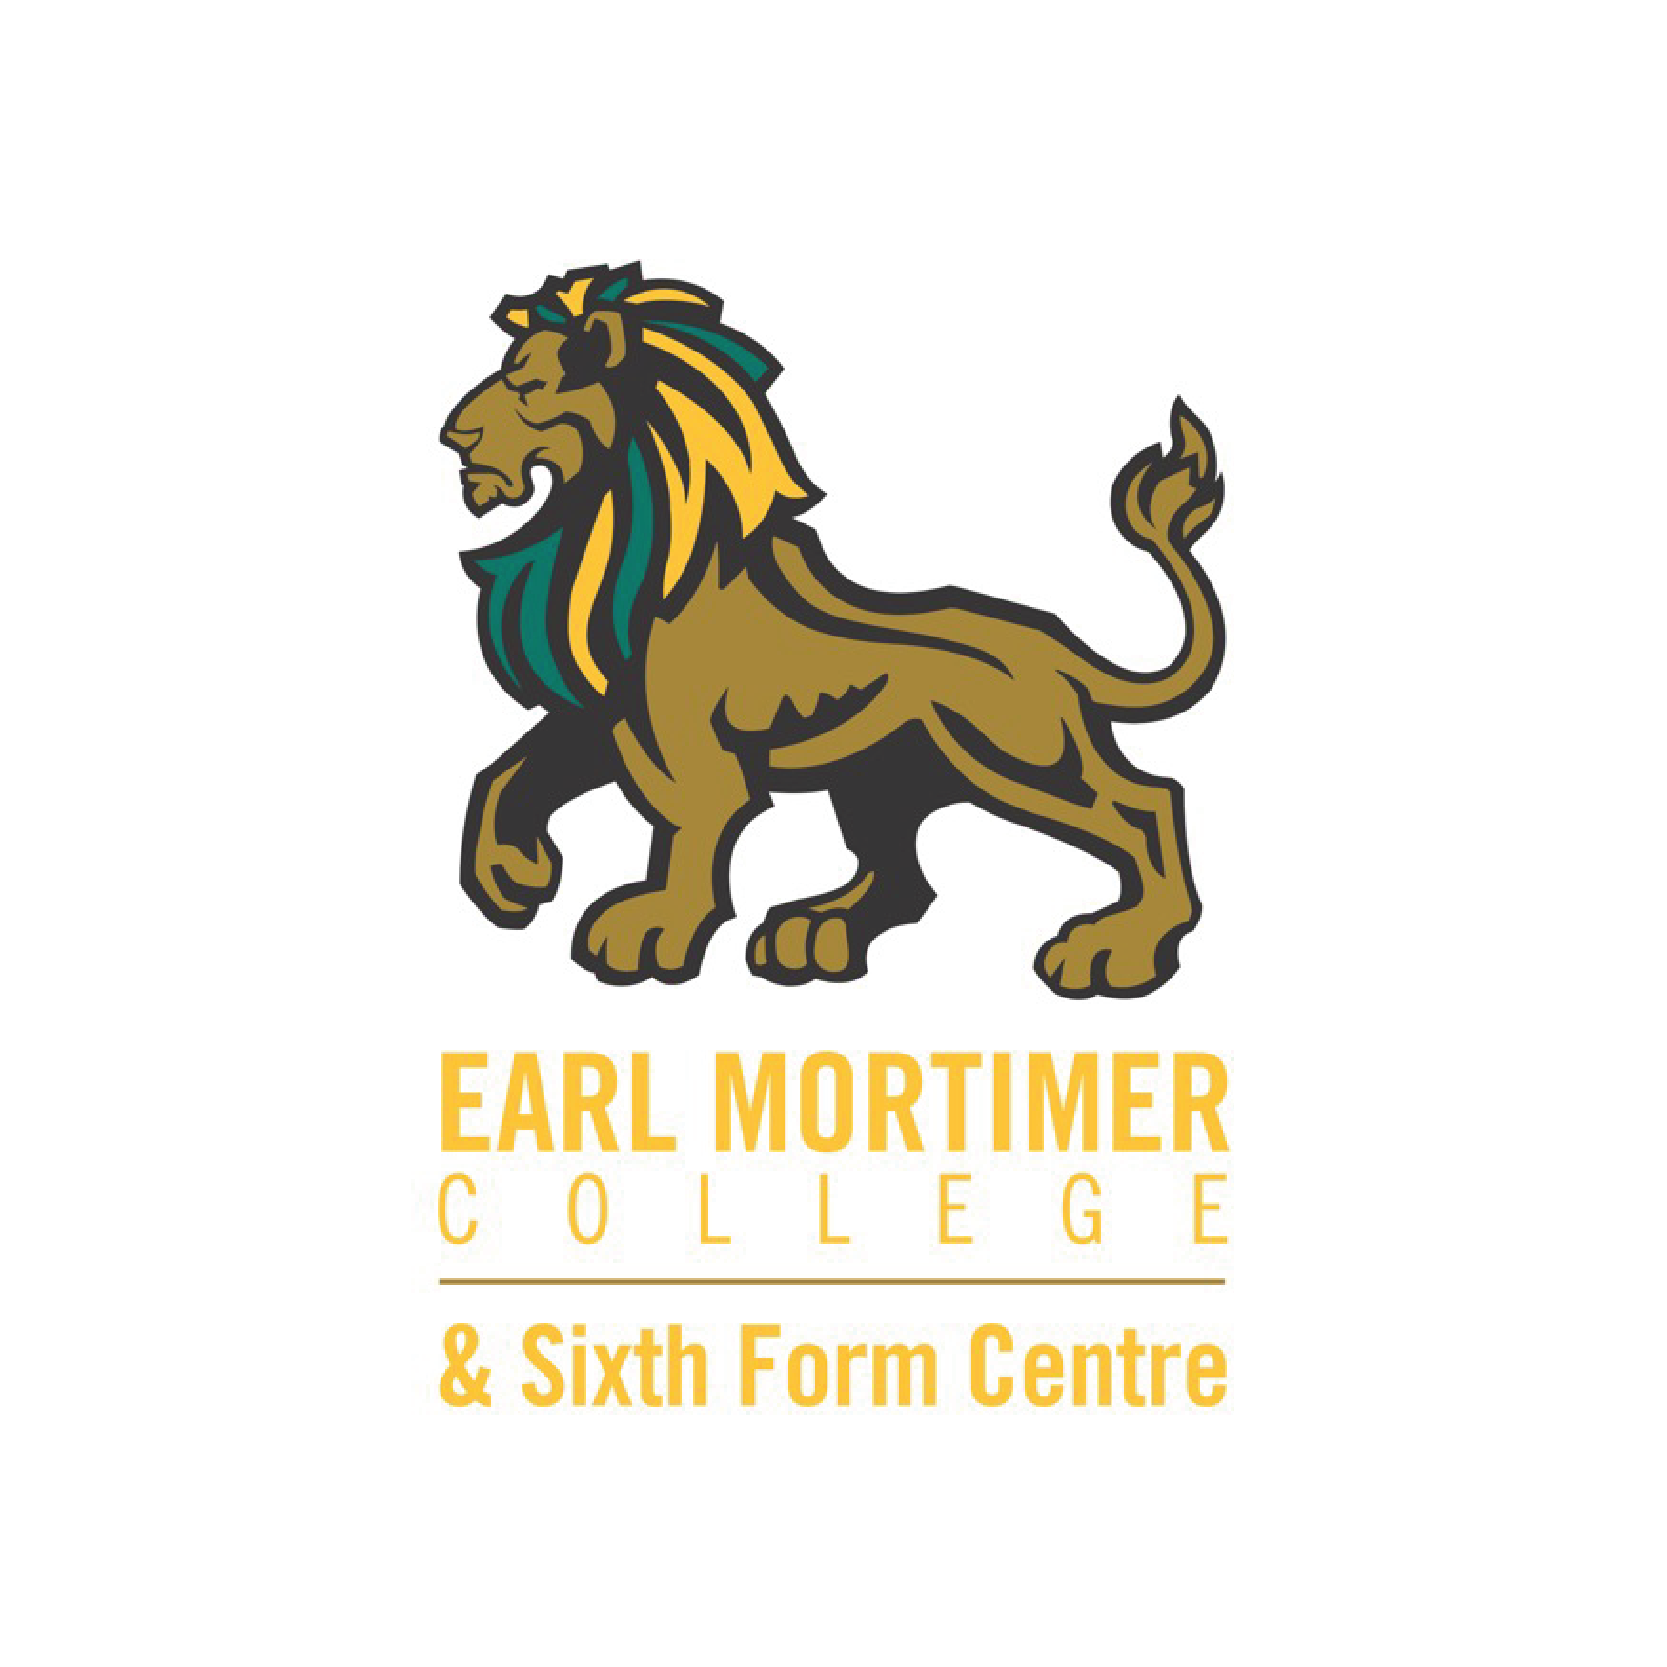 Logotype of Earl Mortimer College